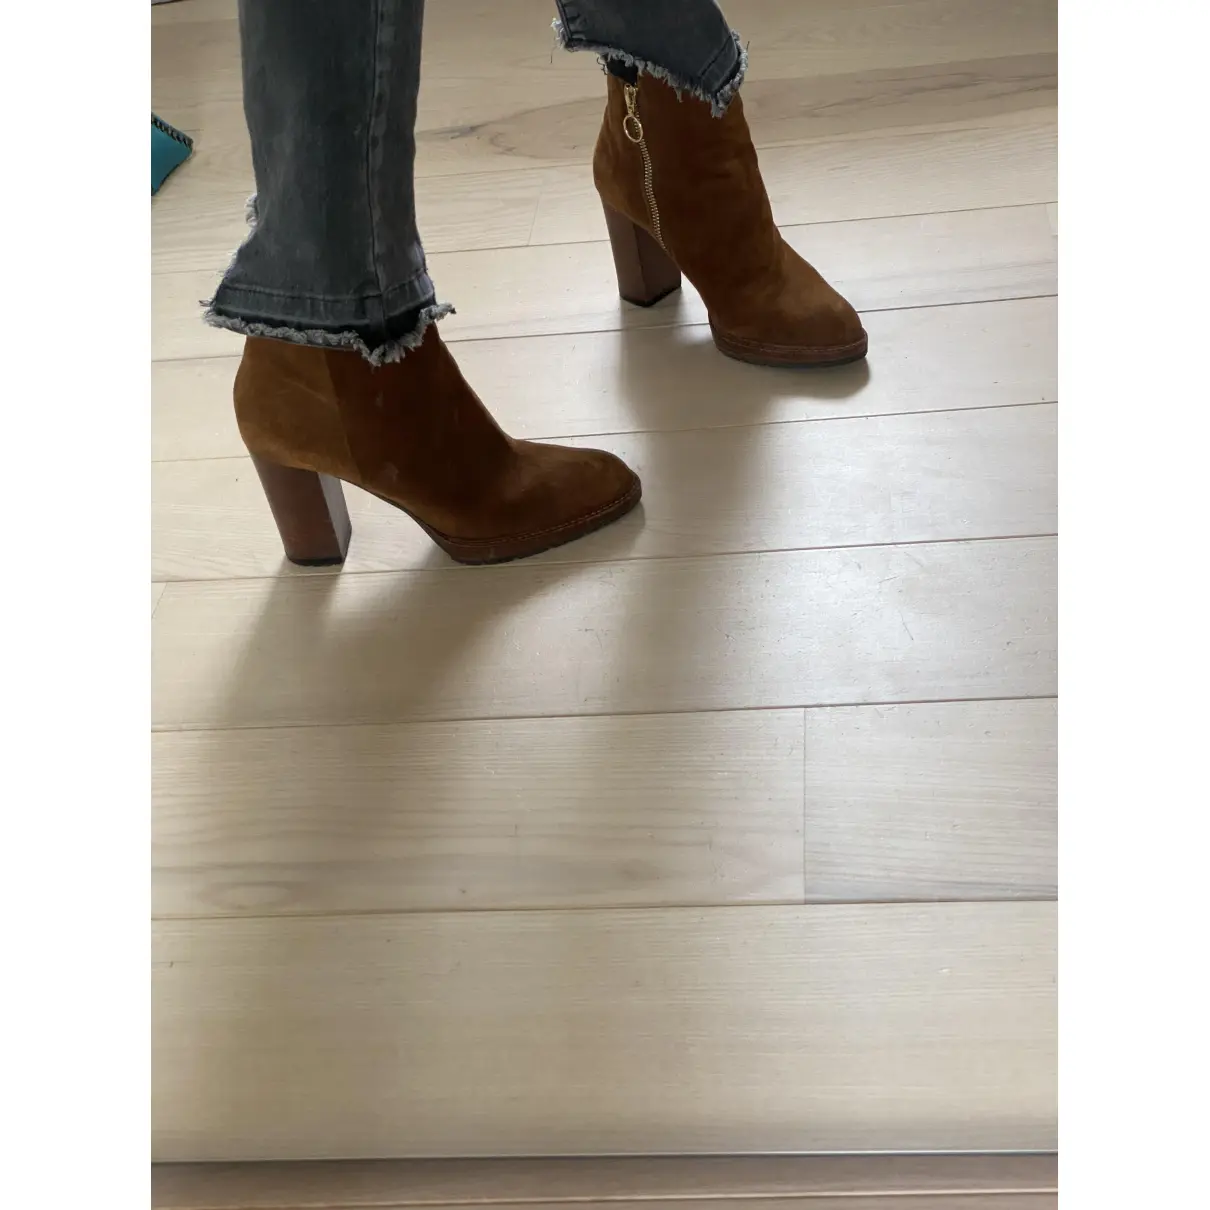 Buy Notabene Ankle boots online